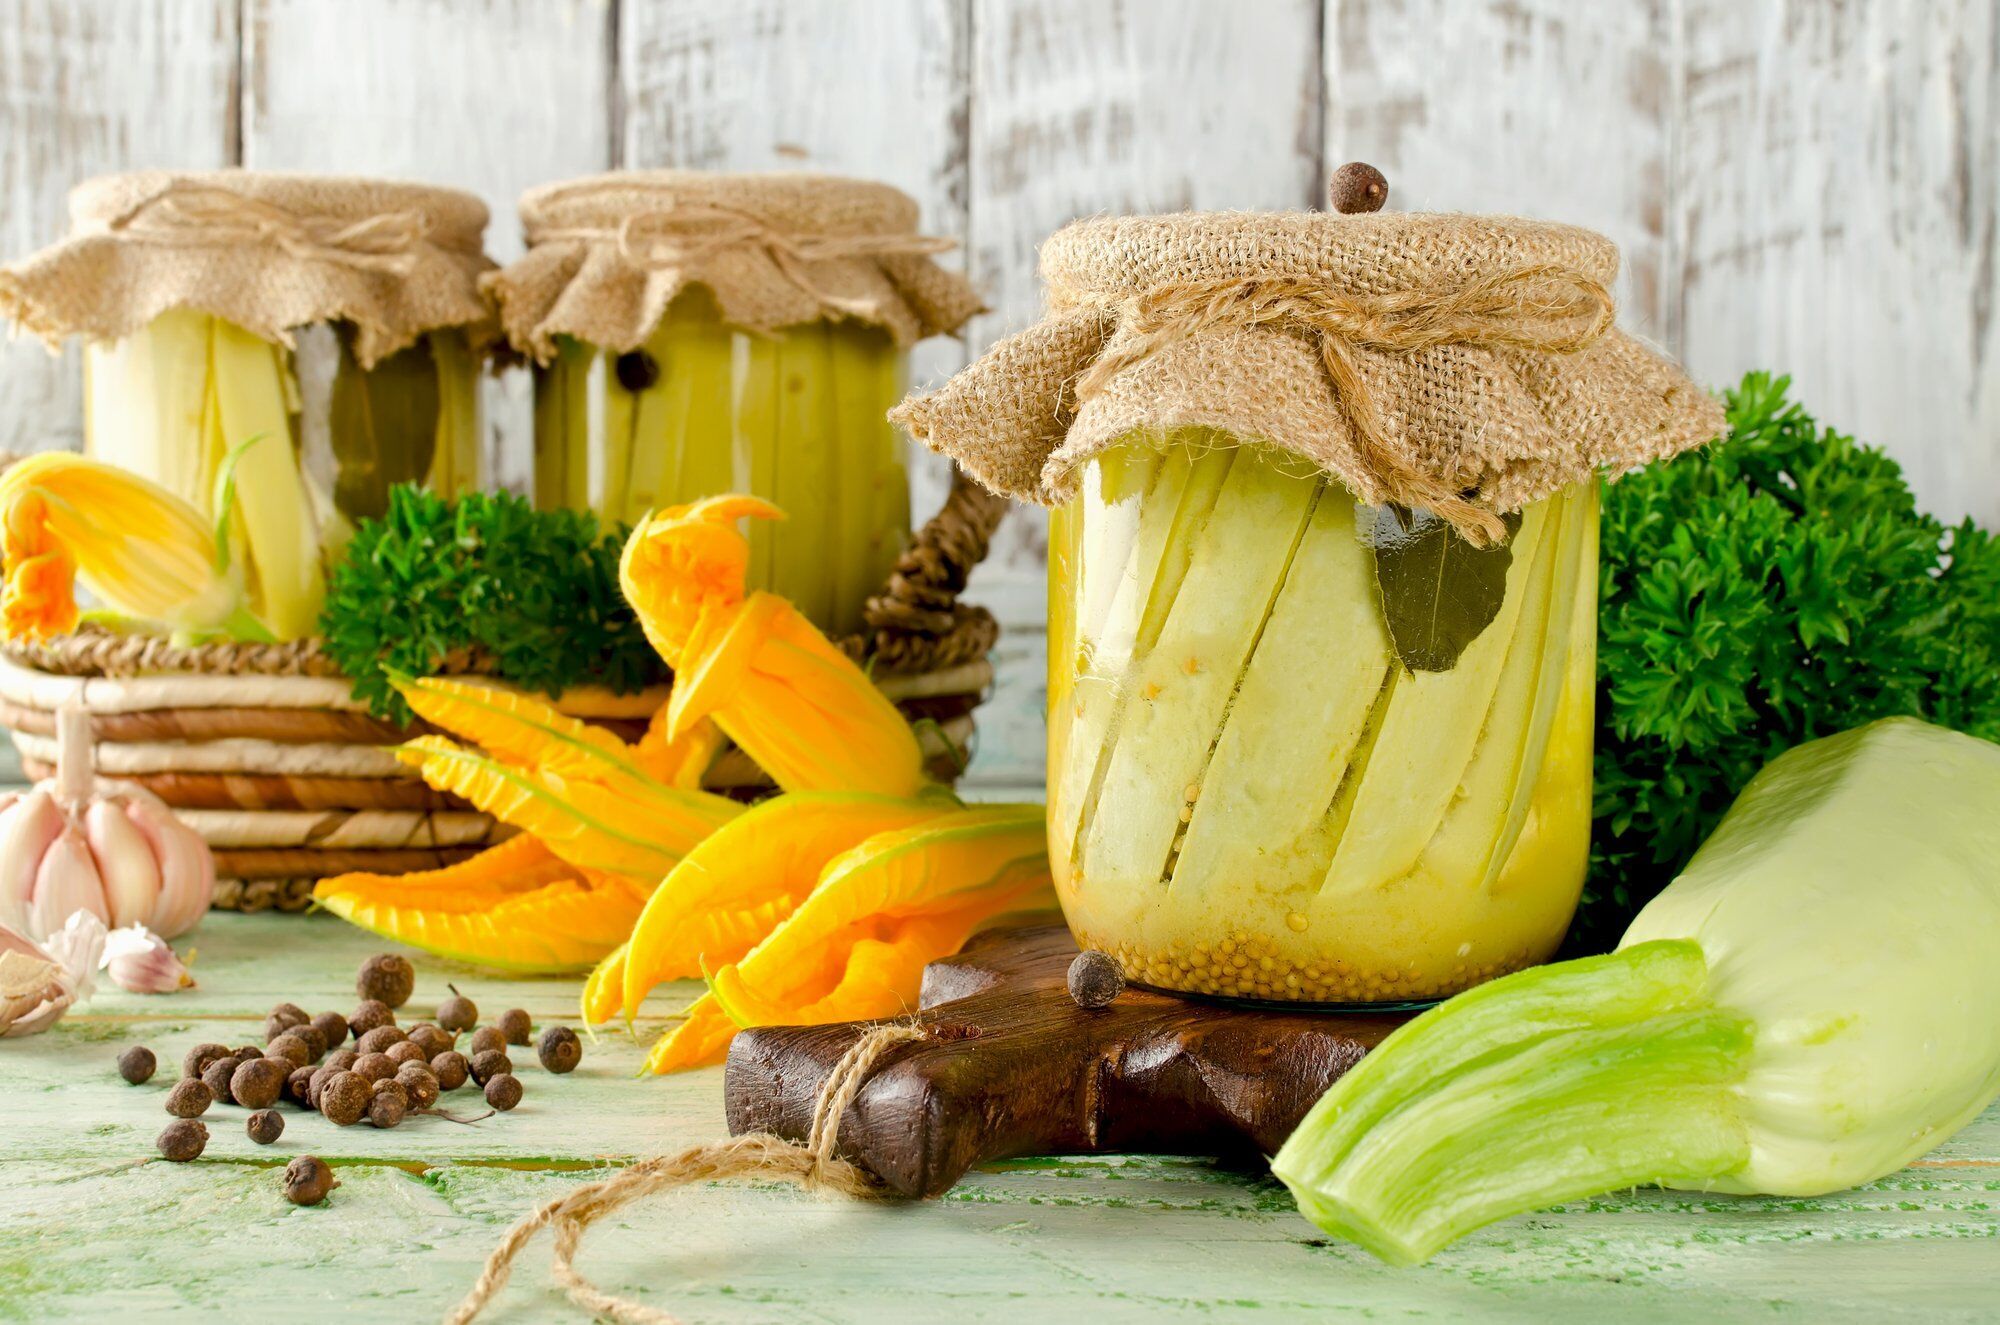 Courgettes for winter